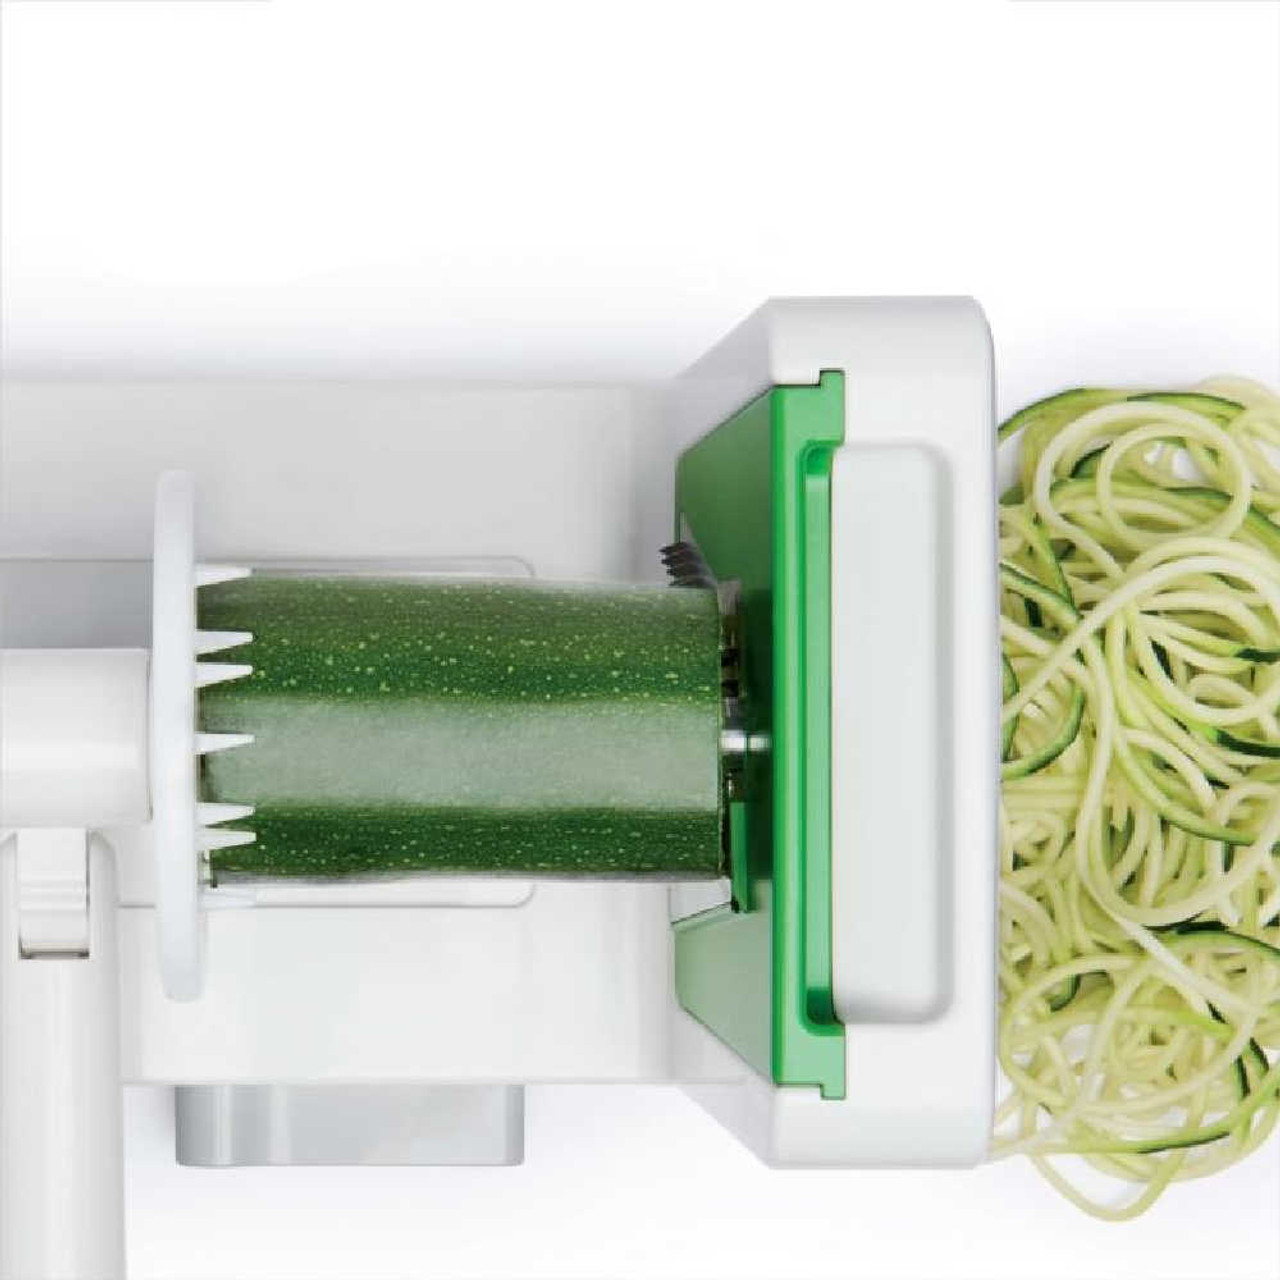 https://cdn11.bigcommerce.com/s-hccytny0od/images/stencil/1280x1280/products/4688/19010/OXO_Good_Grips_Tabletop_Spiralizer_2__27015.1651502099.jpg?c=2?imbypass=on